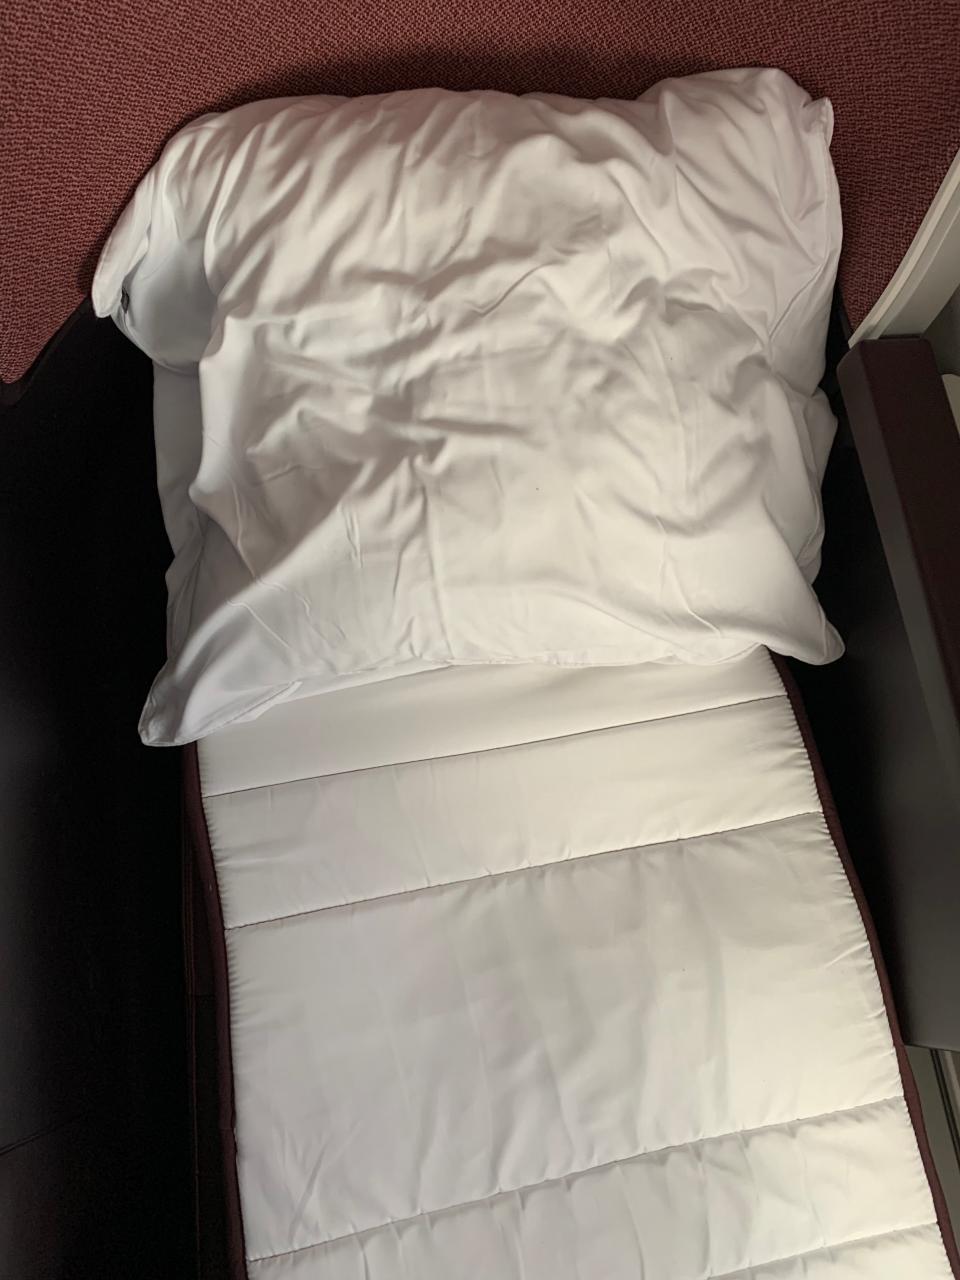 An airplane bed with white sheets and a white pillow.